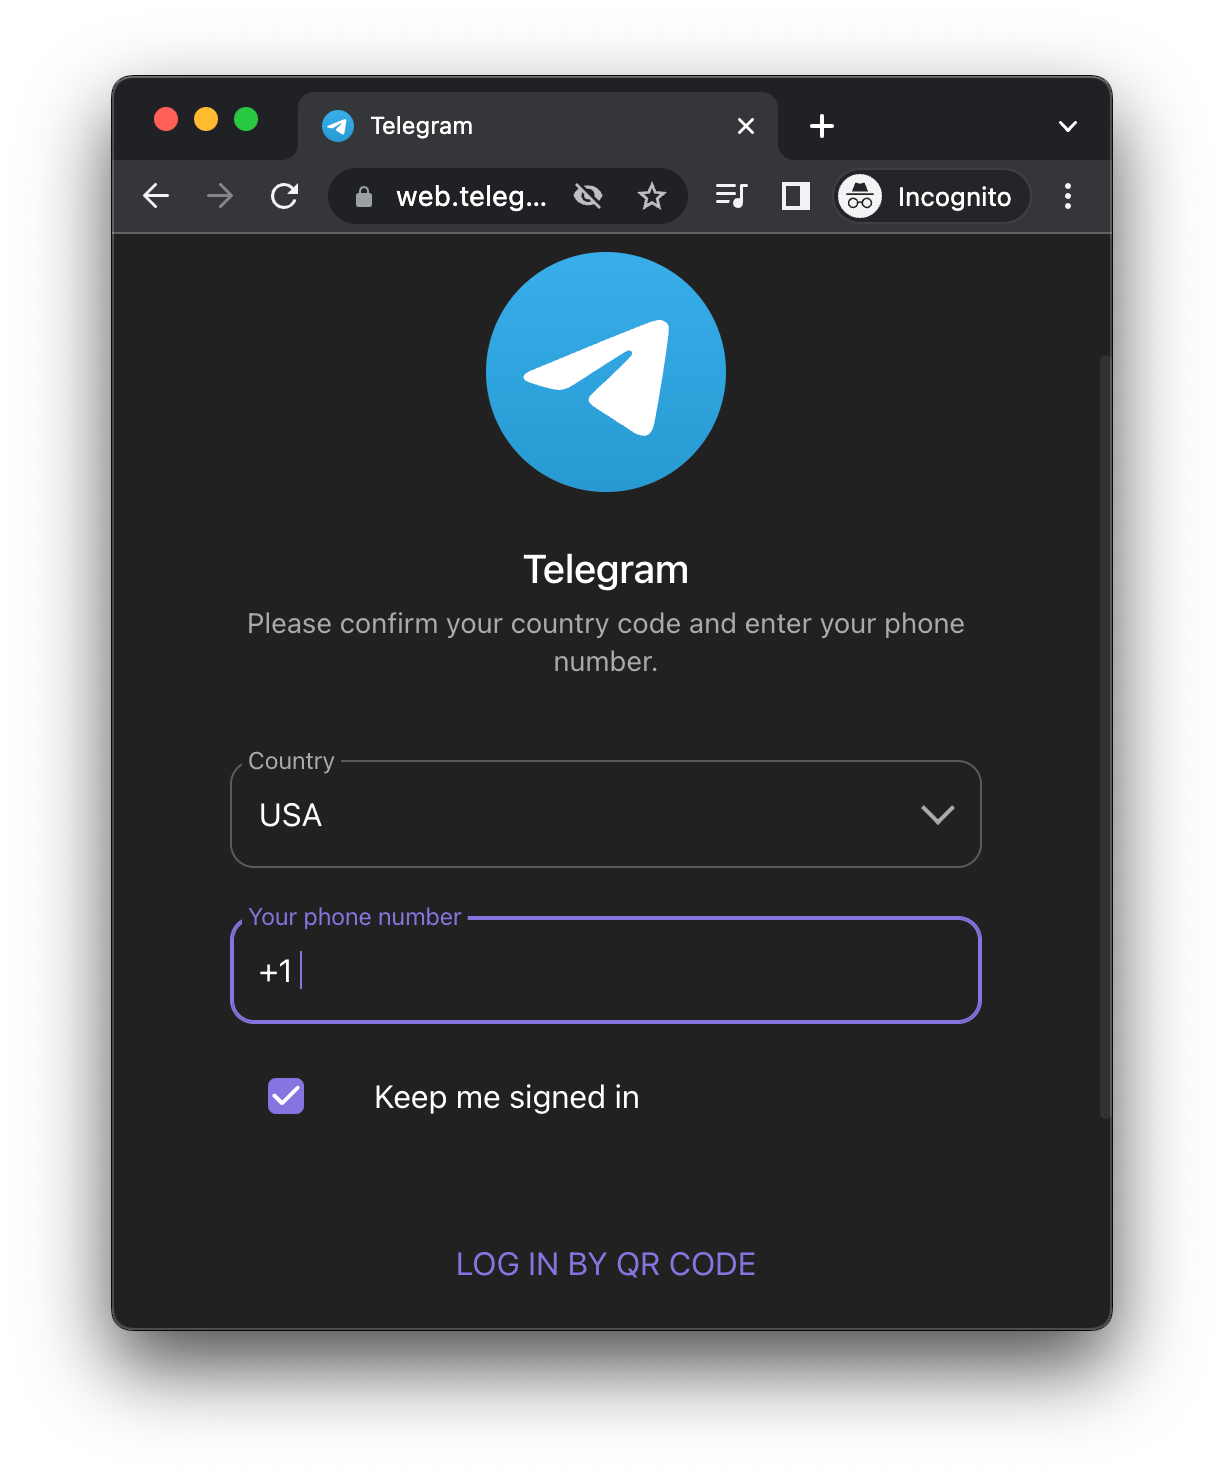 Telegram web login screen which shows a country and phone number entry